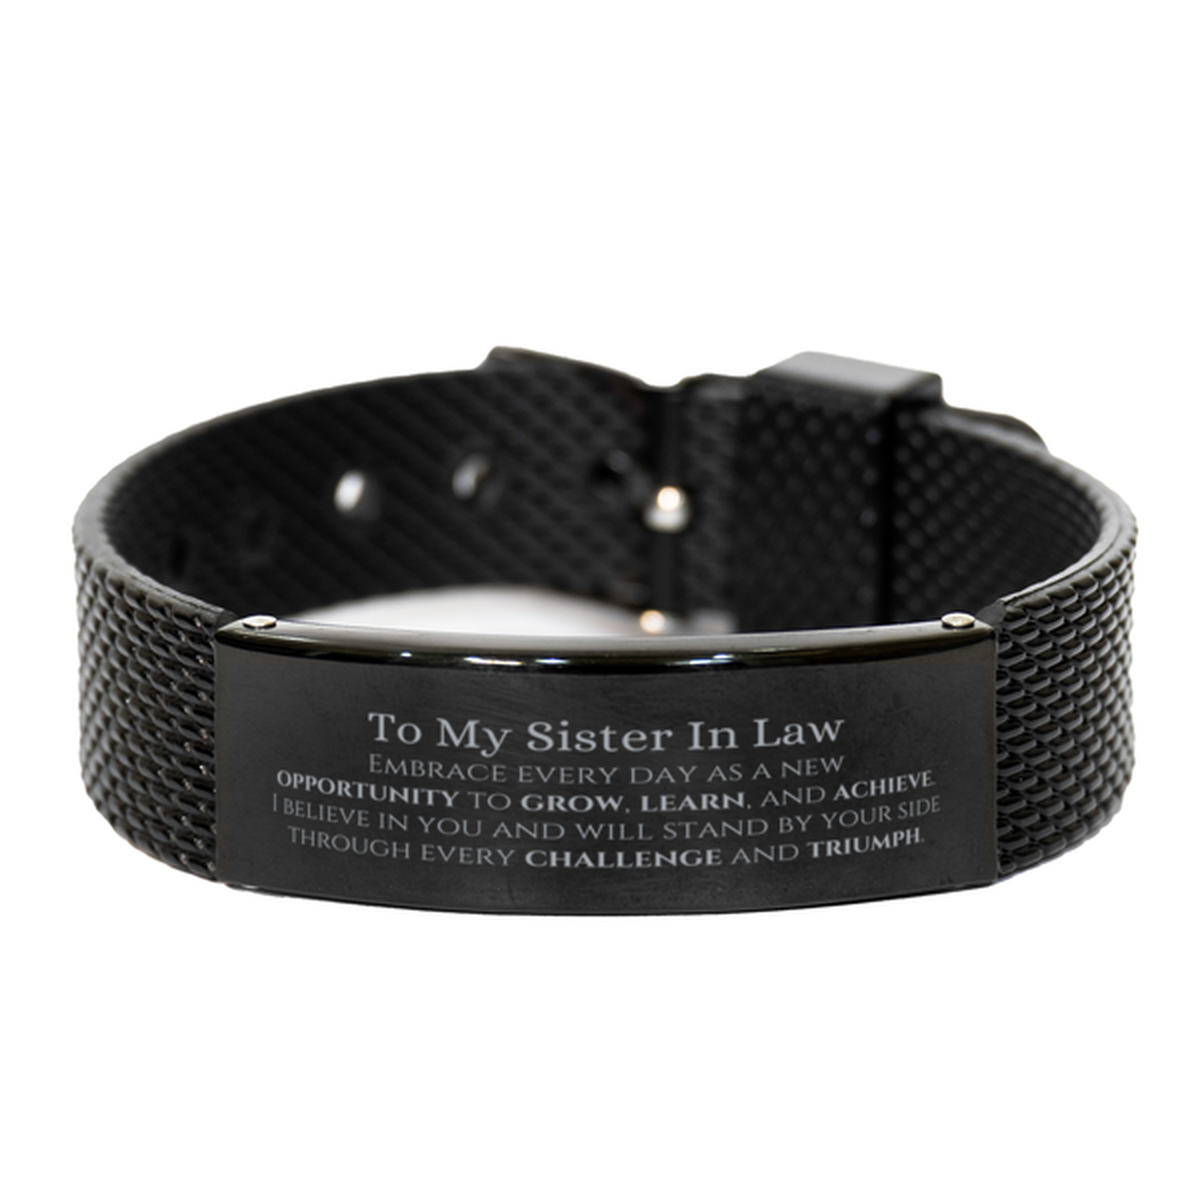 To My Sister In Law Gifts, I believe in you and will stand by your side, Inspirational Black Shark Mesh Bracelet For Sister In Law, Birthday Christmas Motivational Sister In Law Gifts